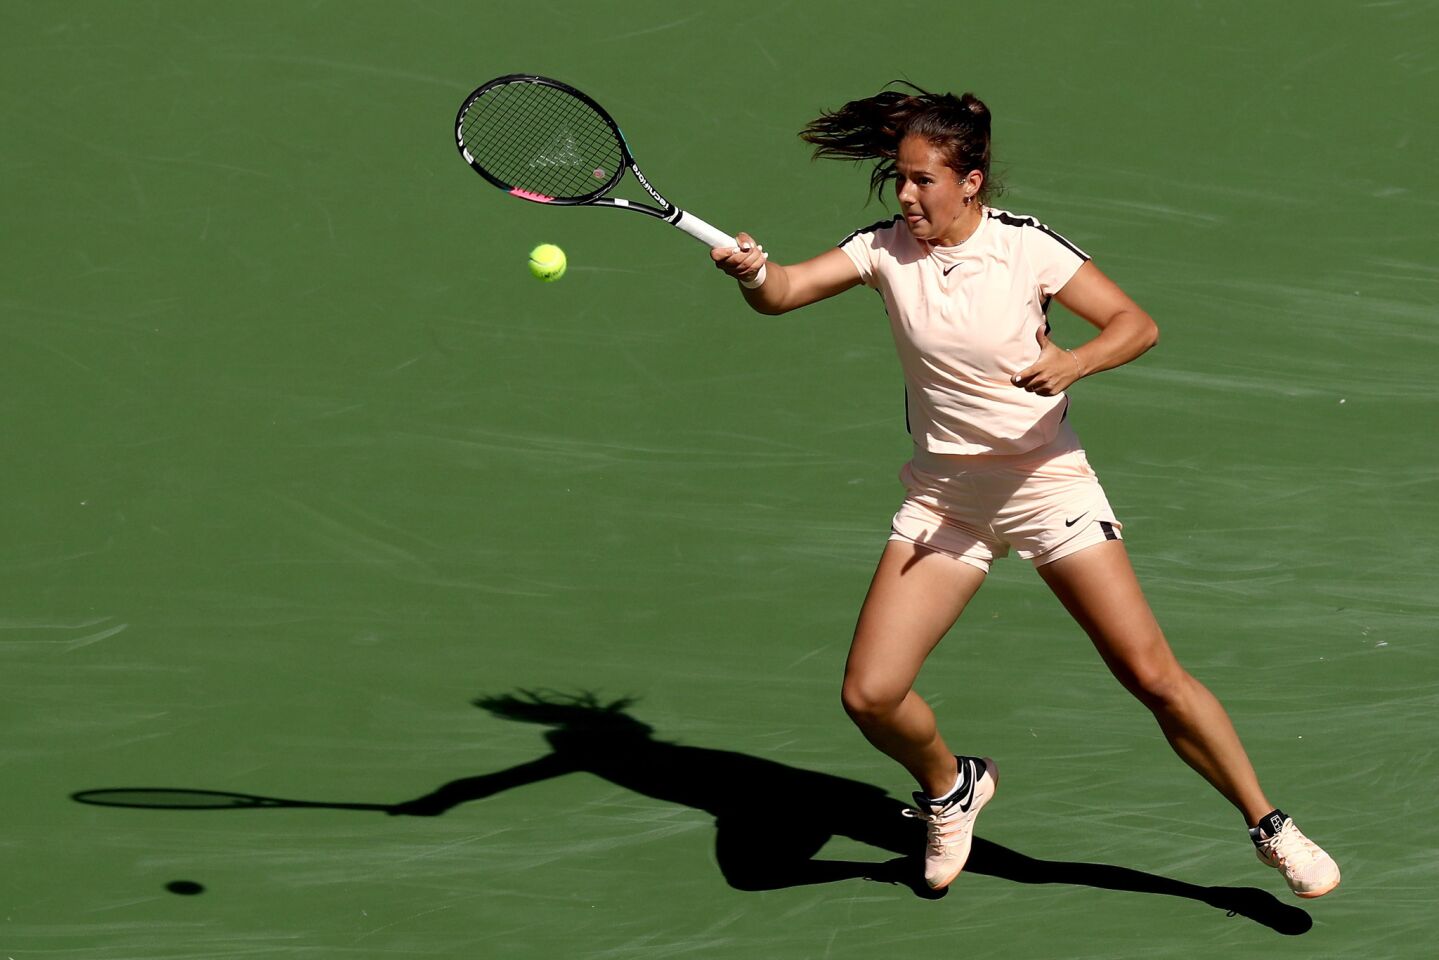 INDIAN WELLS, CA - MARCH 18: Daria Kasatkina of Russia returns a shot to Naomi Osaka of Japan during the women's final on Day 14 of the BNP Paribas Open at the Indian Wells Tennis Garden on March 18, 2018 in Indian Wells, California. (Photo by Matthew Stockman/Getty Images) ** OUTS - ELSENT, FPG, CM - OUTS * NM, PH, VA if sourced by CT, LA or MoD **